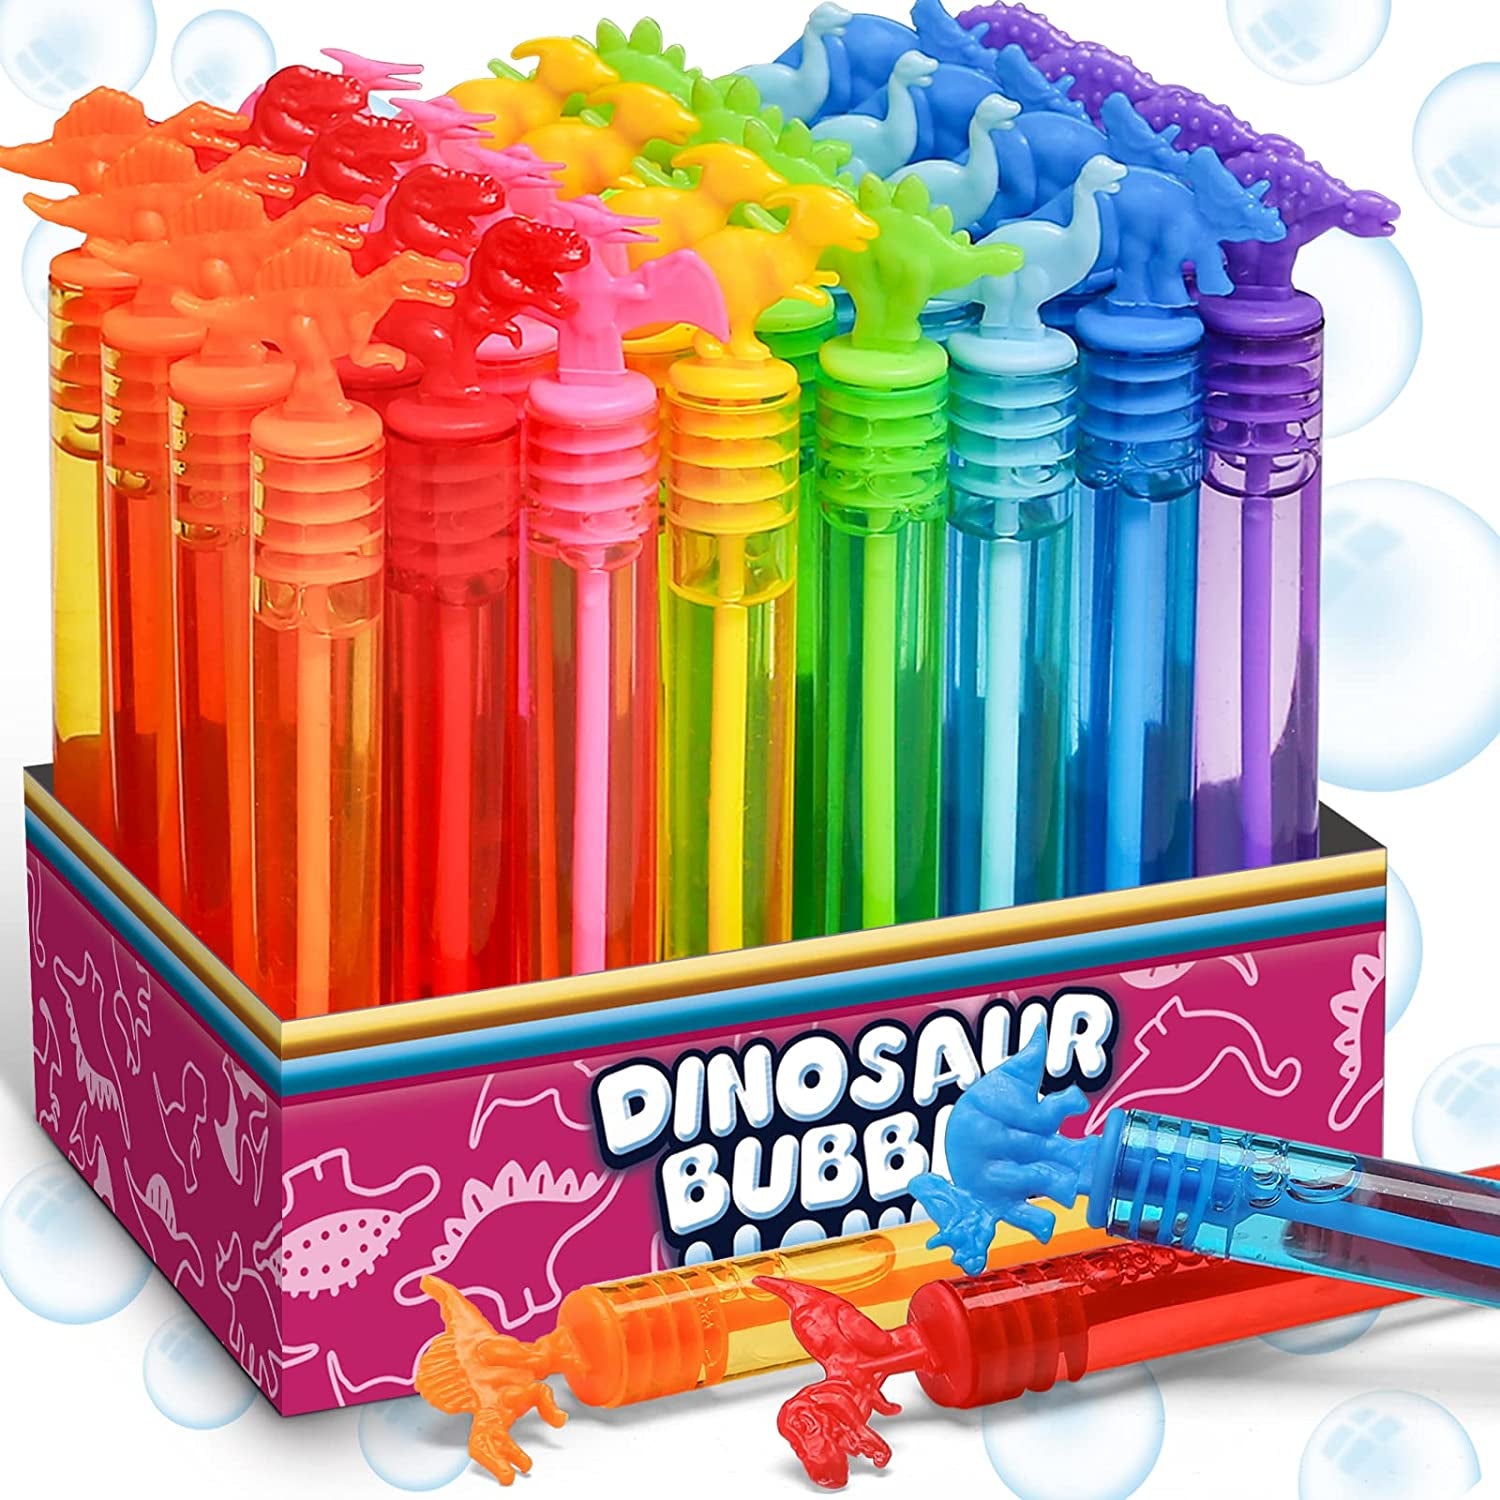  32-Pack Dinosaur Bubble Wands - Fun Party Favors with Gift Box